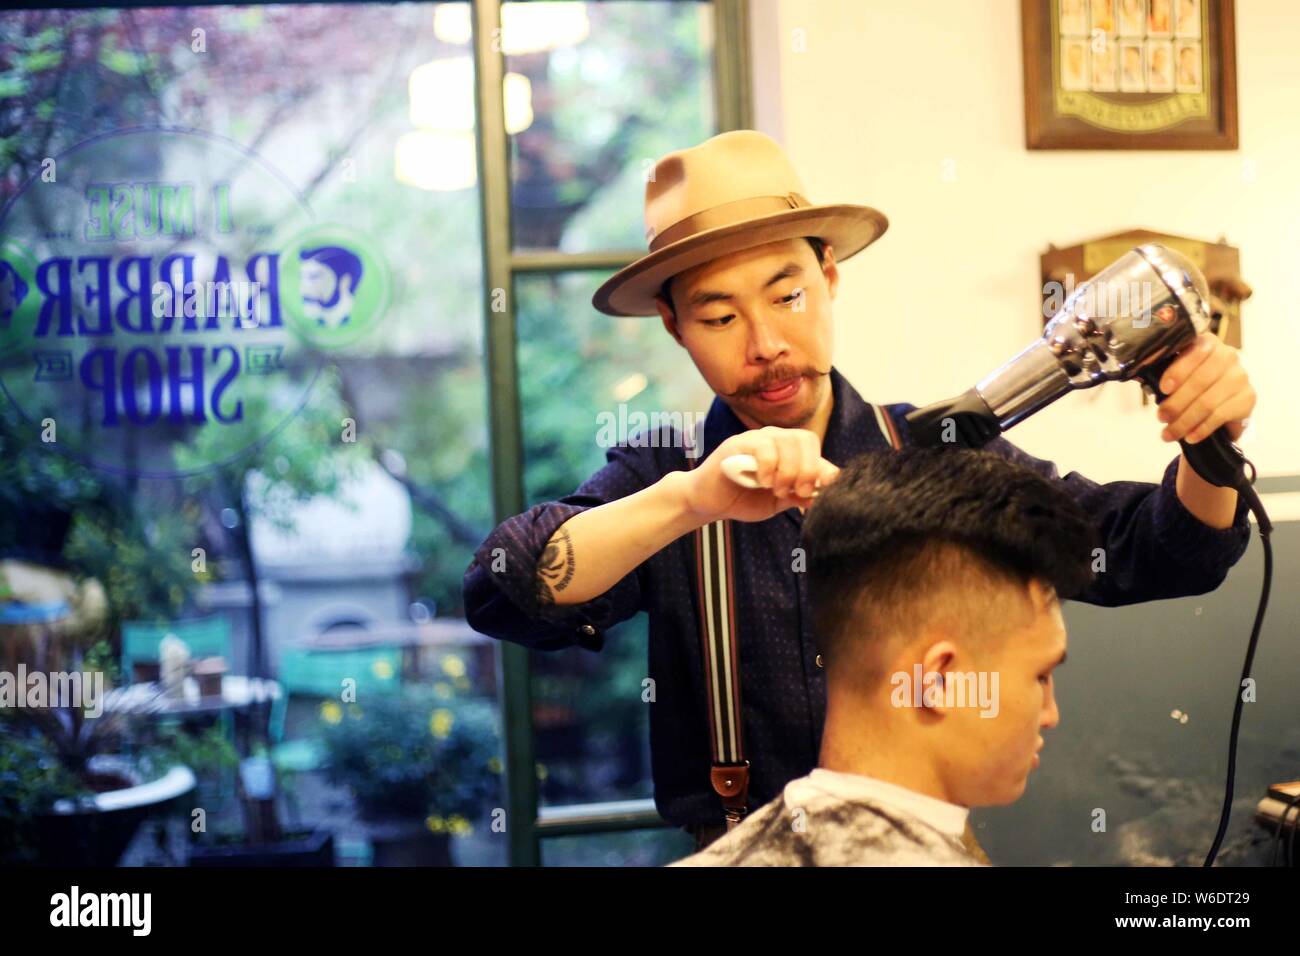 The owner of a Shanghai-based barbershop called BarberShop focusing only on men's vintage-style haircuts arranges a retro hairstyle for a customer in Stock Photo